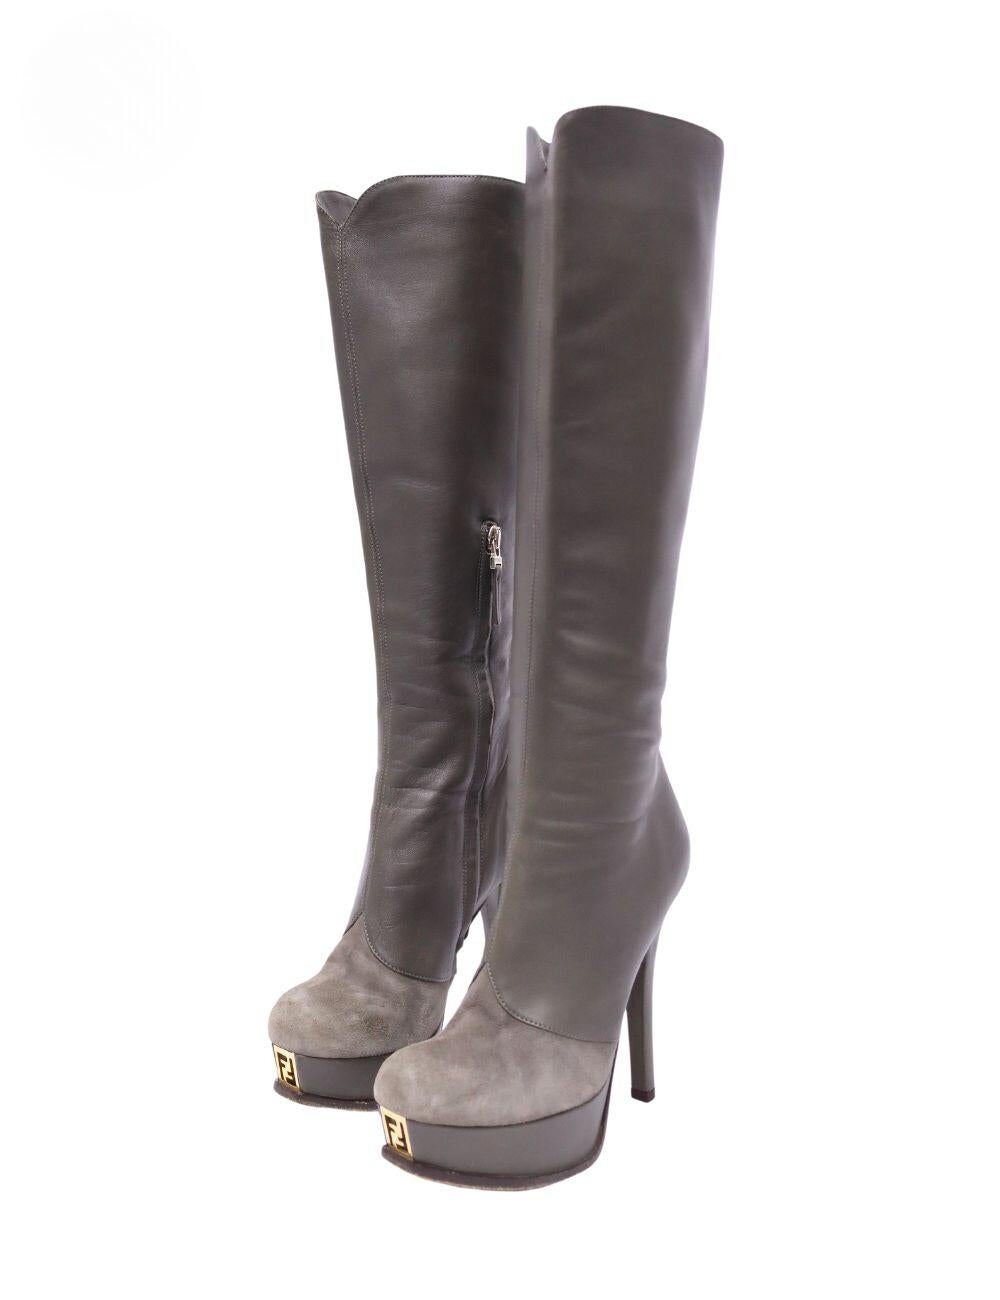 Fendi Leather Knee Length Boots Size EU 36 In Good Condition For Sale In Amman, JO